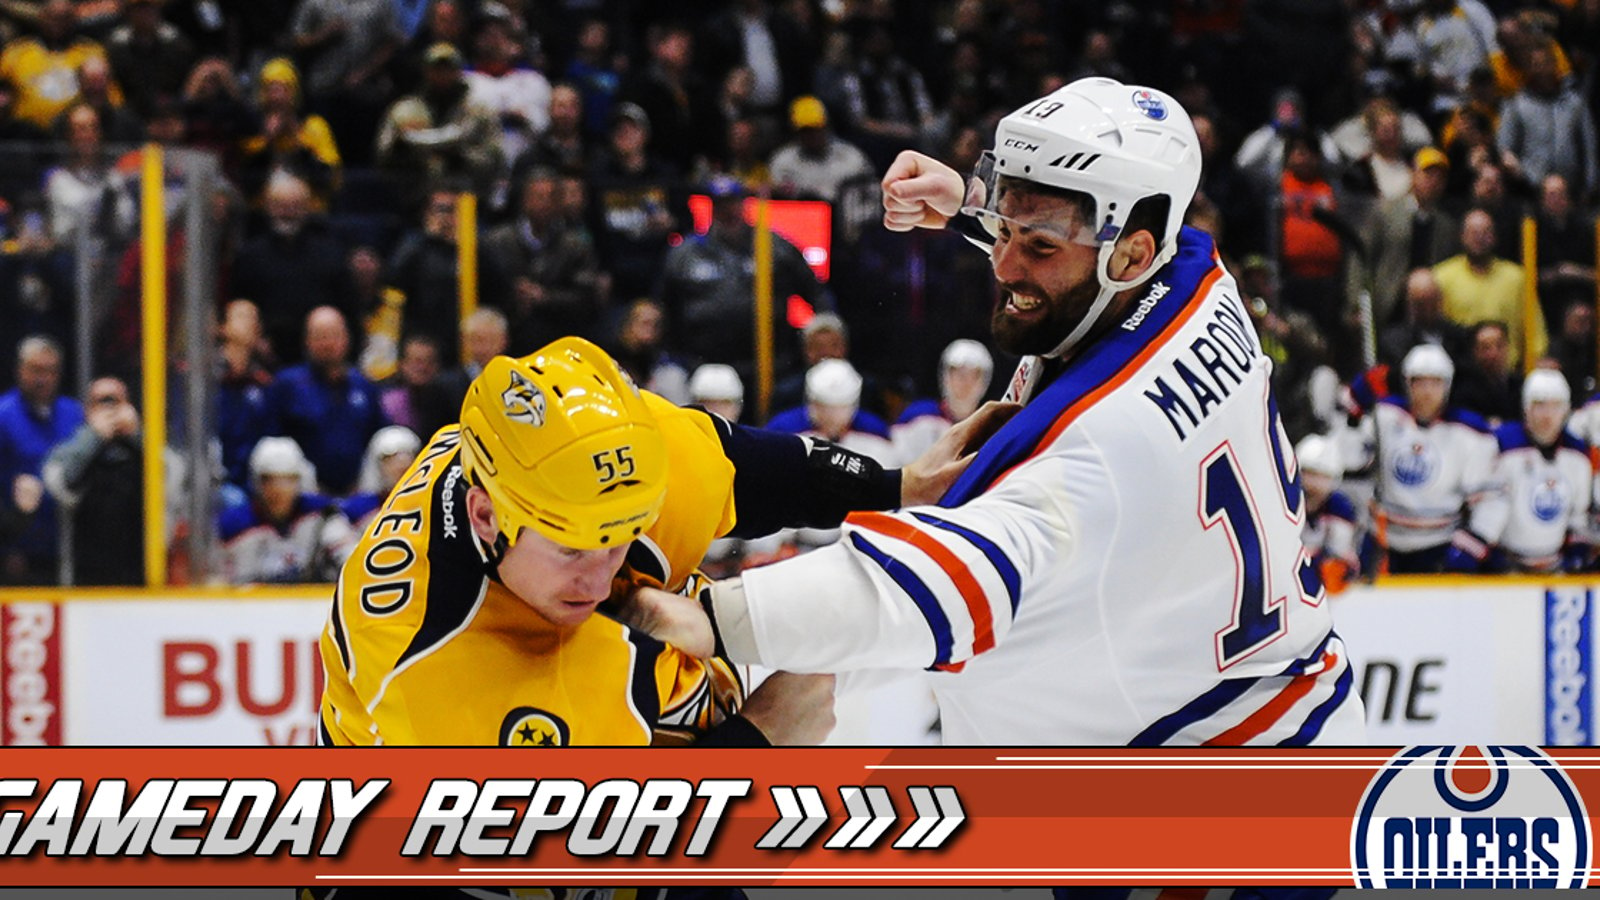 Gameday Report: Oilers stacking up a few big bodies in the lineup for tonight's game!